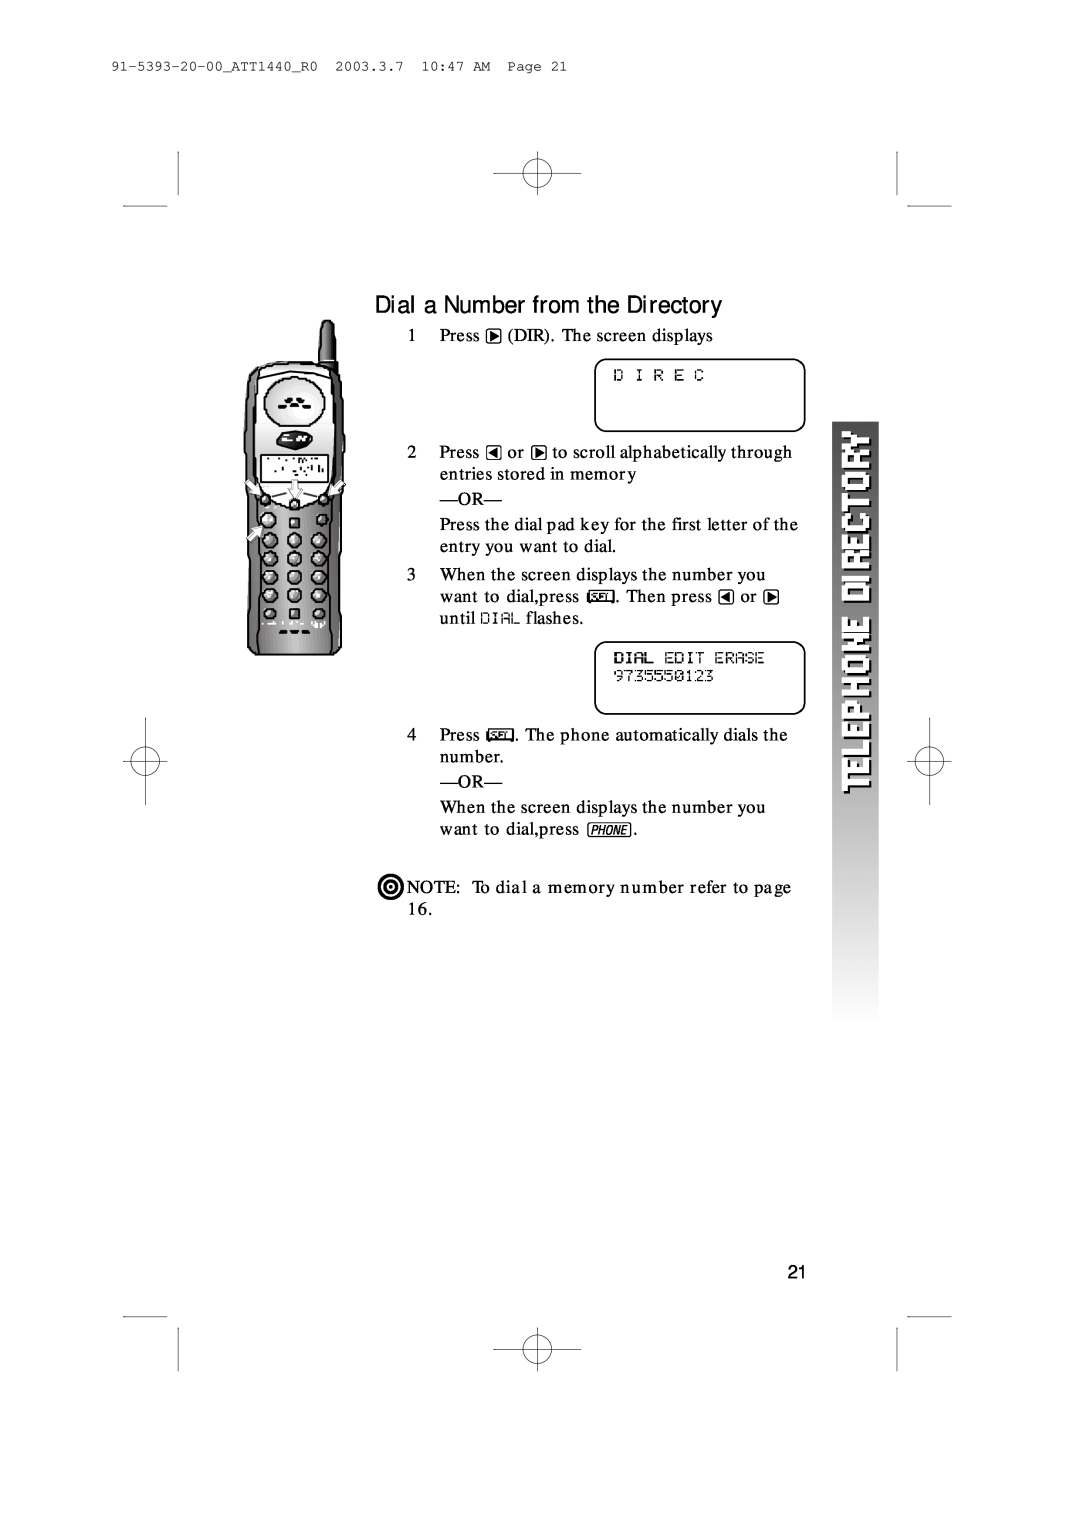 AT&T 1440 user manual Dial a Number from the Directory, ¥NOTE16. To dial a memory number refer to page 